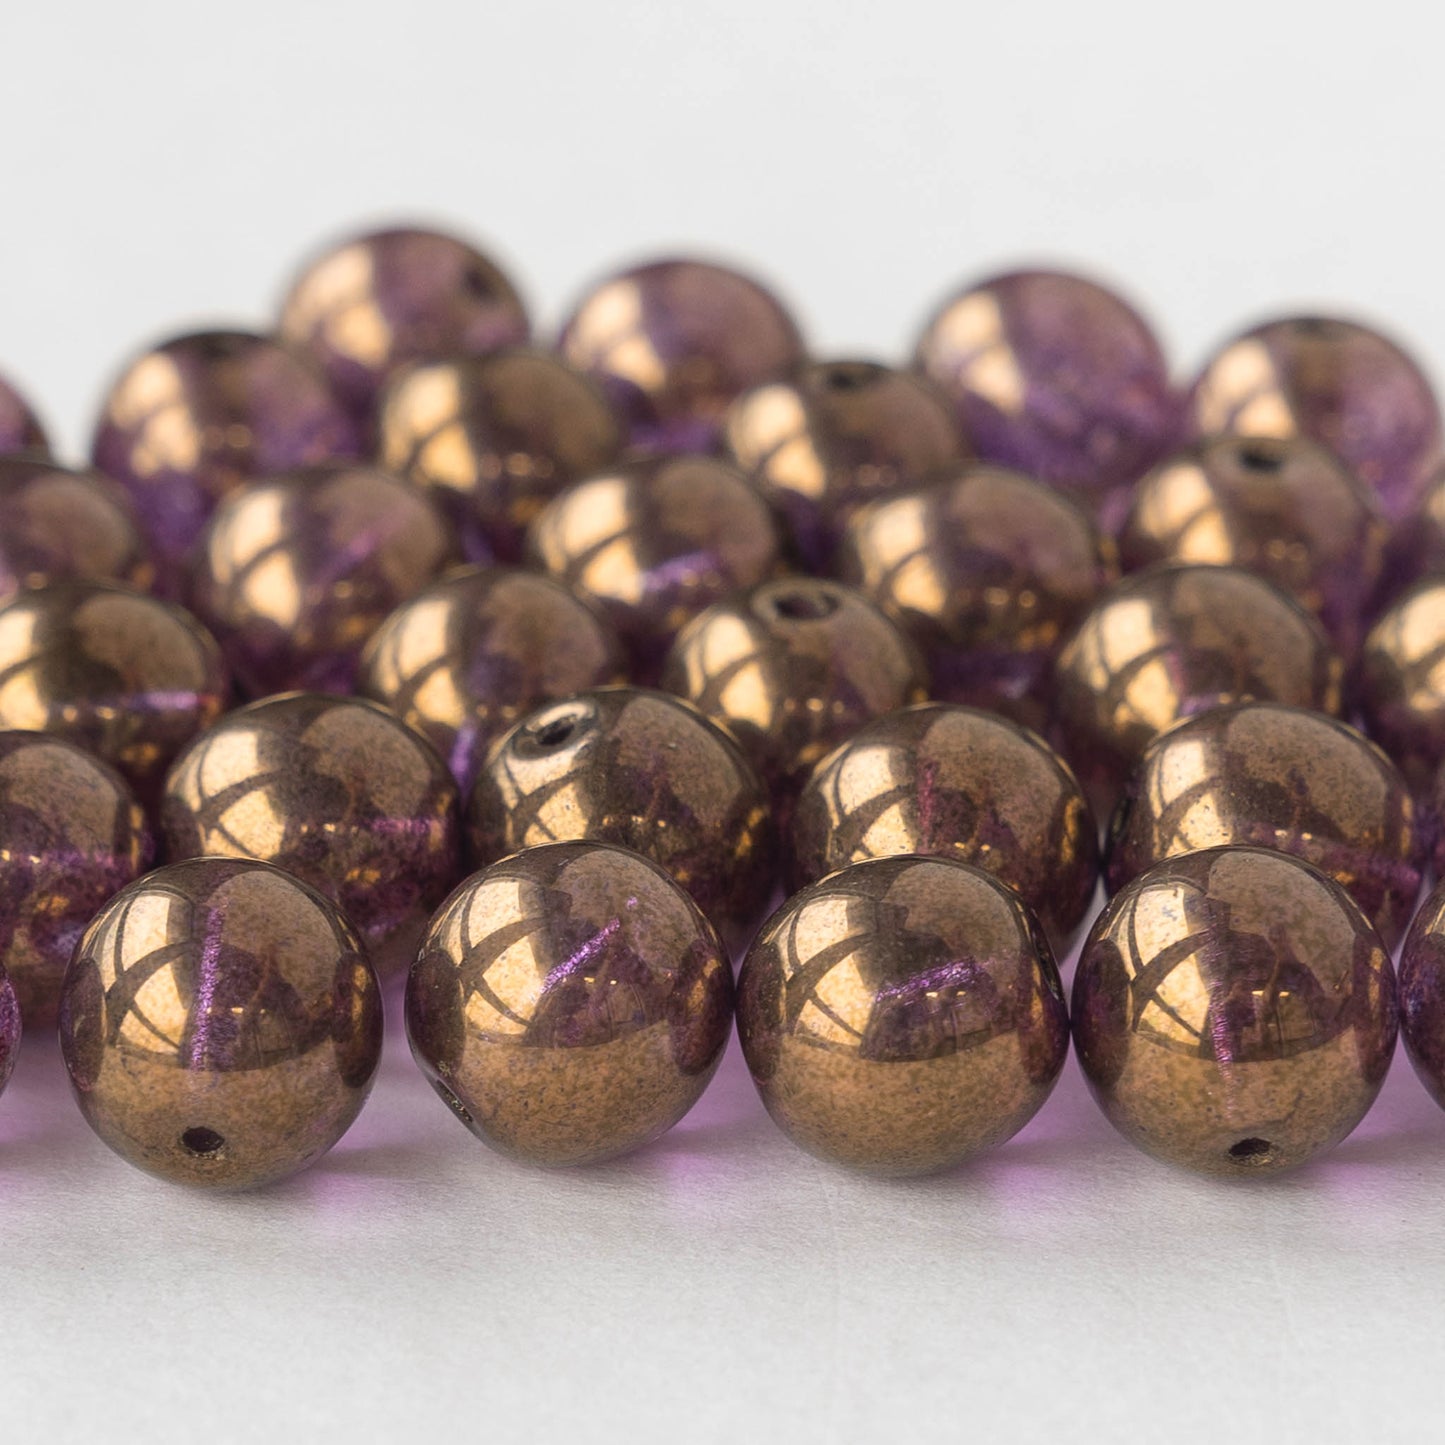 10mm Round Glass Beads - Violet Purple Gold Luster - 10 Beads